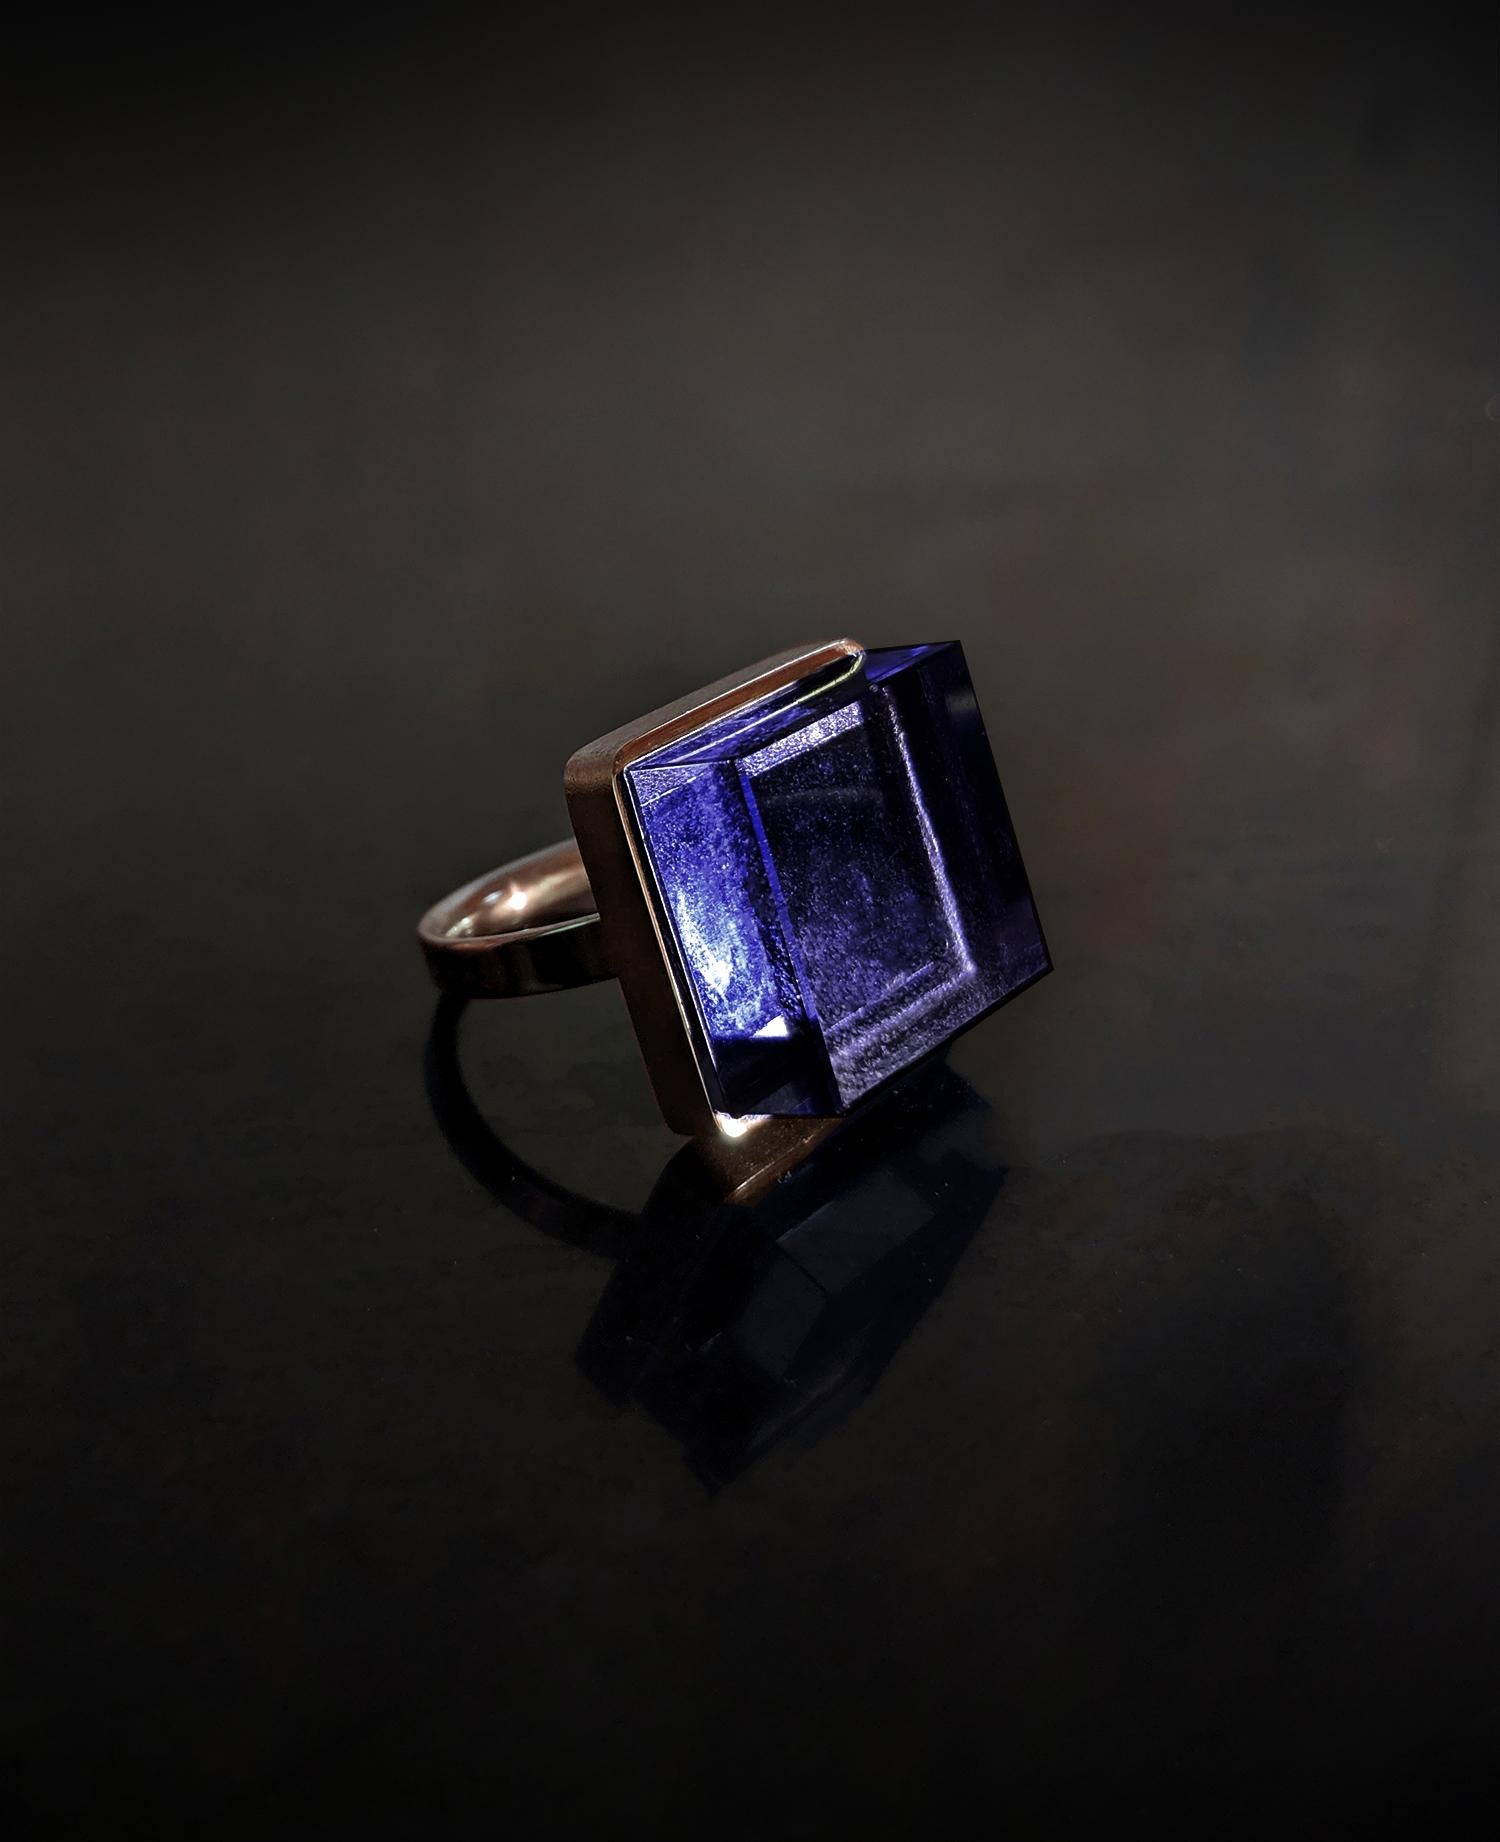 This Art Deco style men ring is in 18 karat rose gold with 15x15x8 mm grown dark vivid amethyst. It was published in Harper's Bazaar and Vogue UA. This piece can be personally signed. It will be packed as a gift. 

The ring reflects the art deco